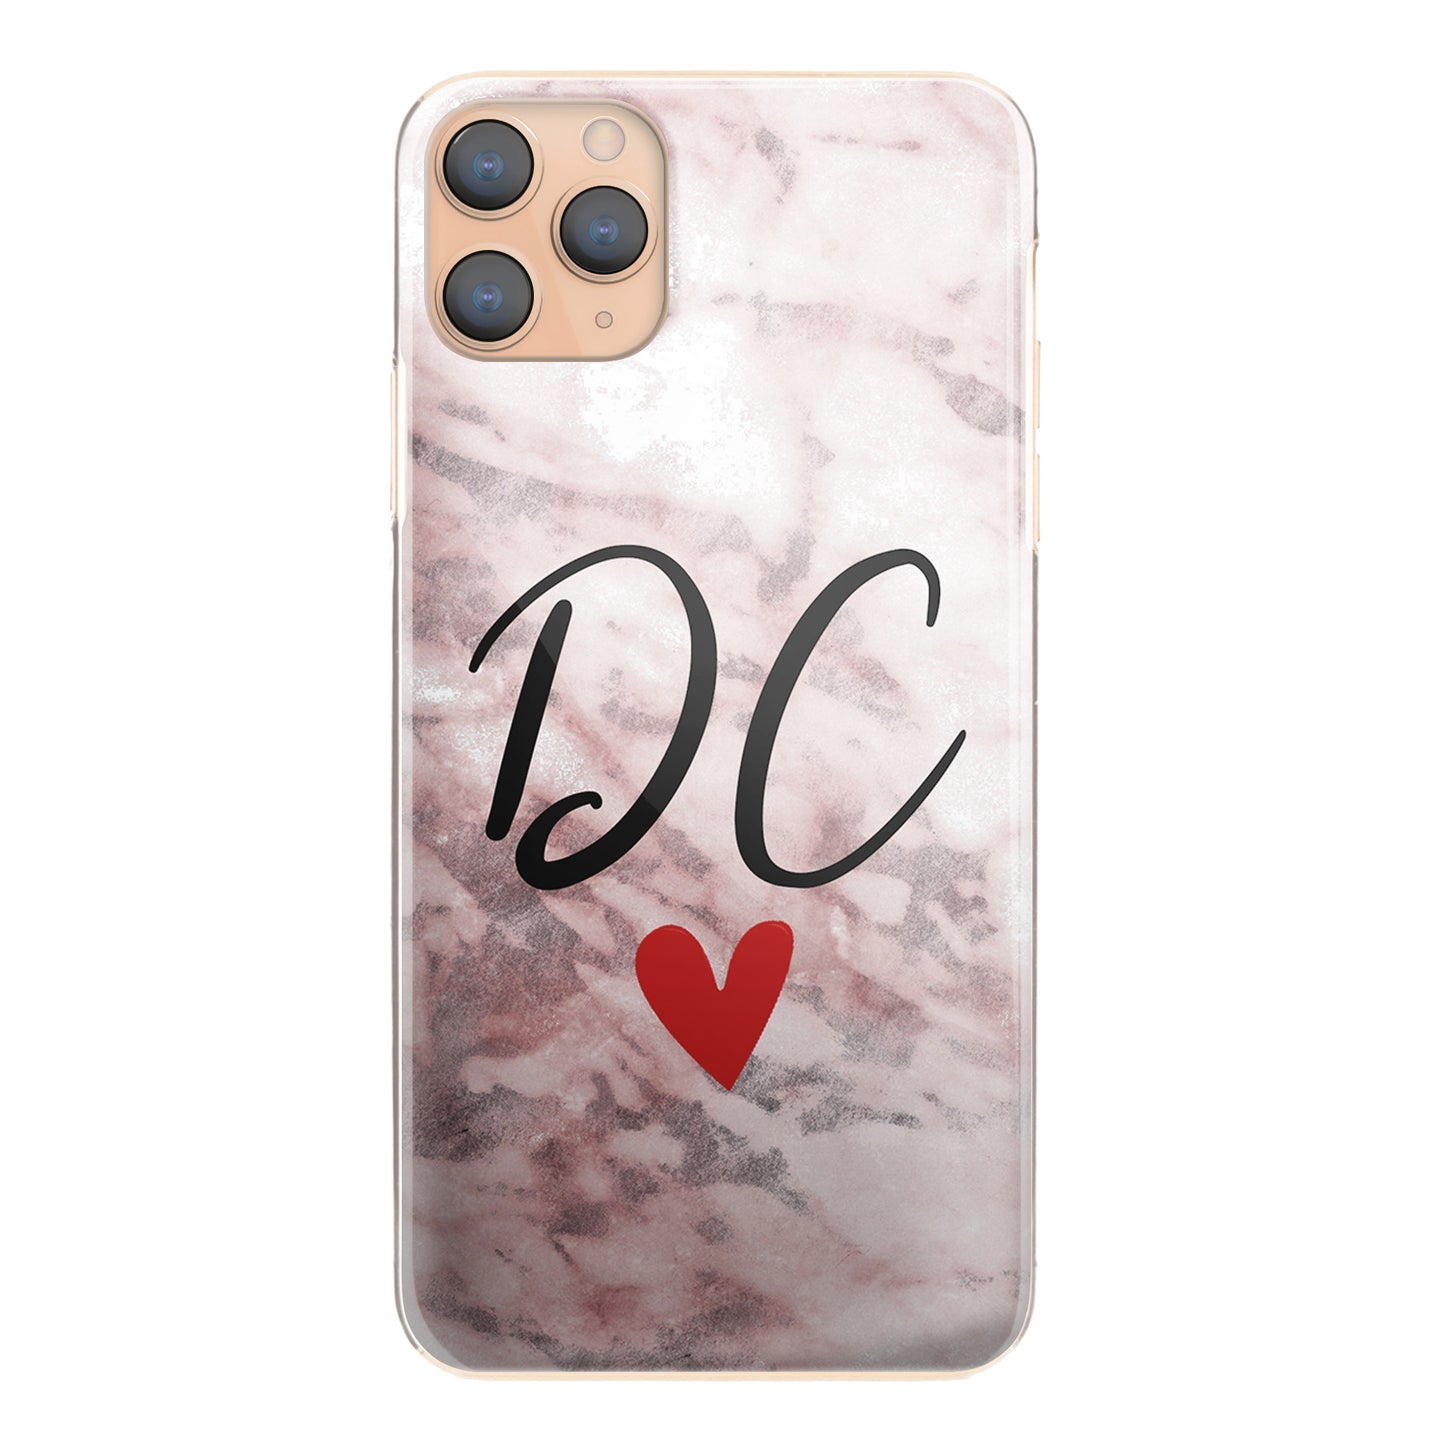 Personalised Nokia Phone Hard Case with Heart Accented Stylish Initials on Pink Marble